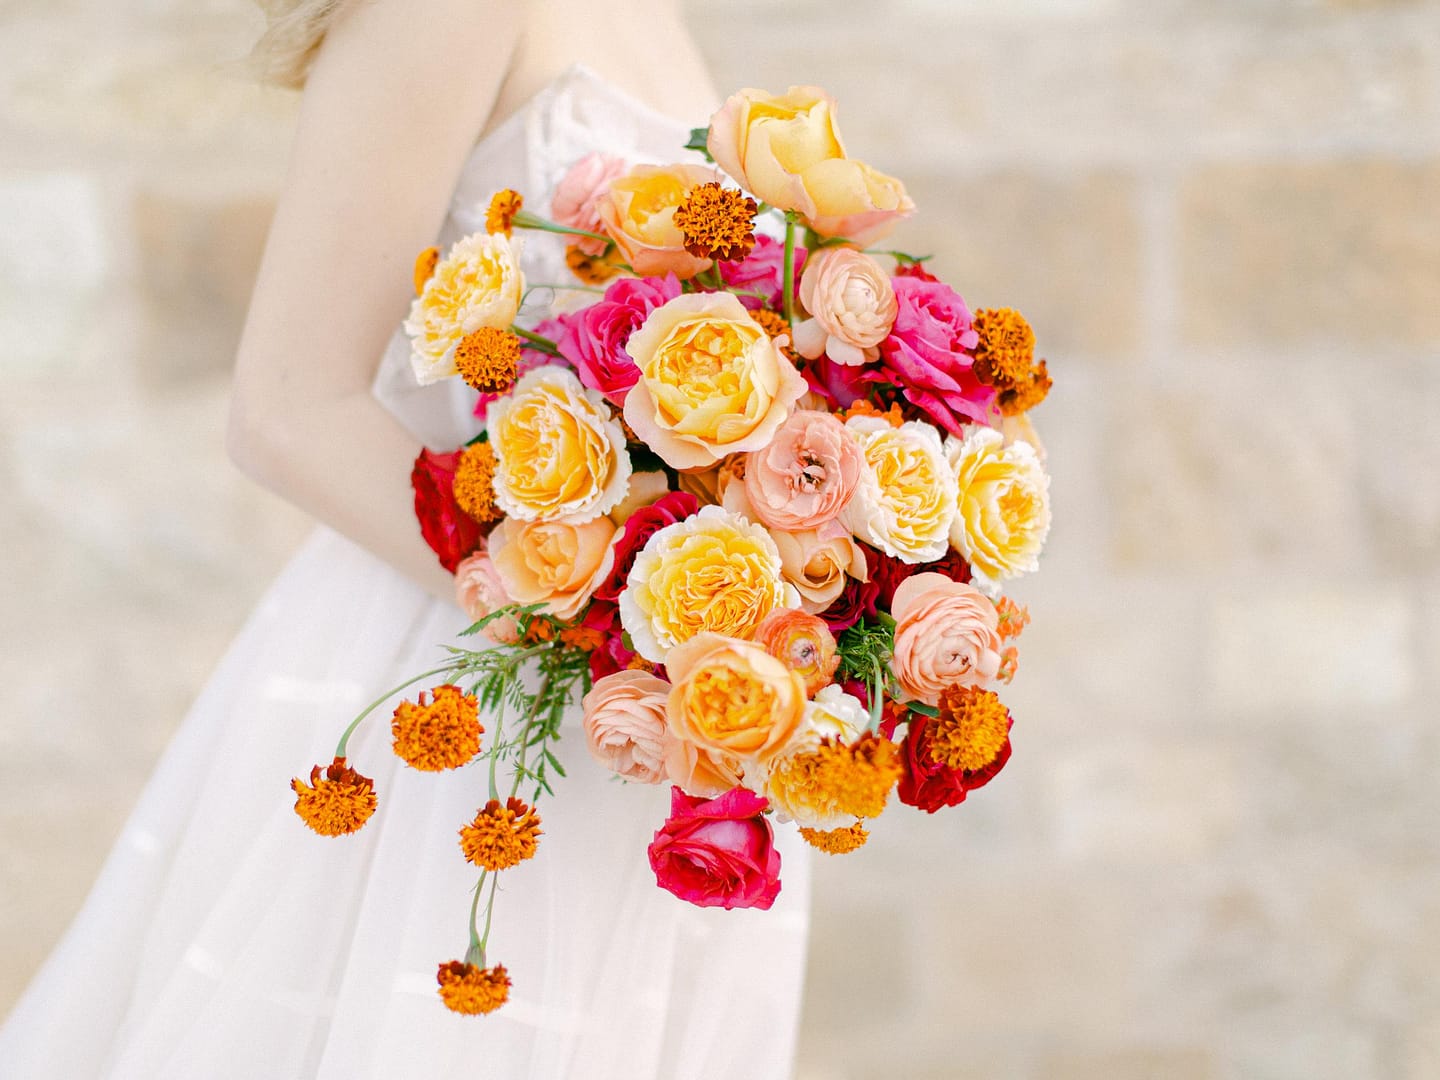 Colourful Wedding Flowers Bouquet With Pink And Yellow Roses